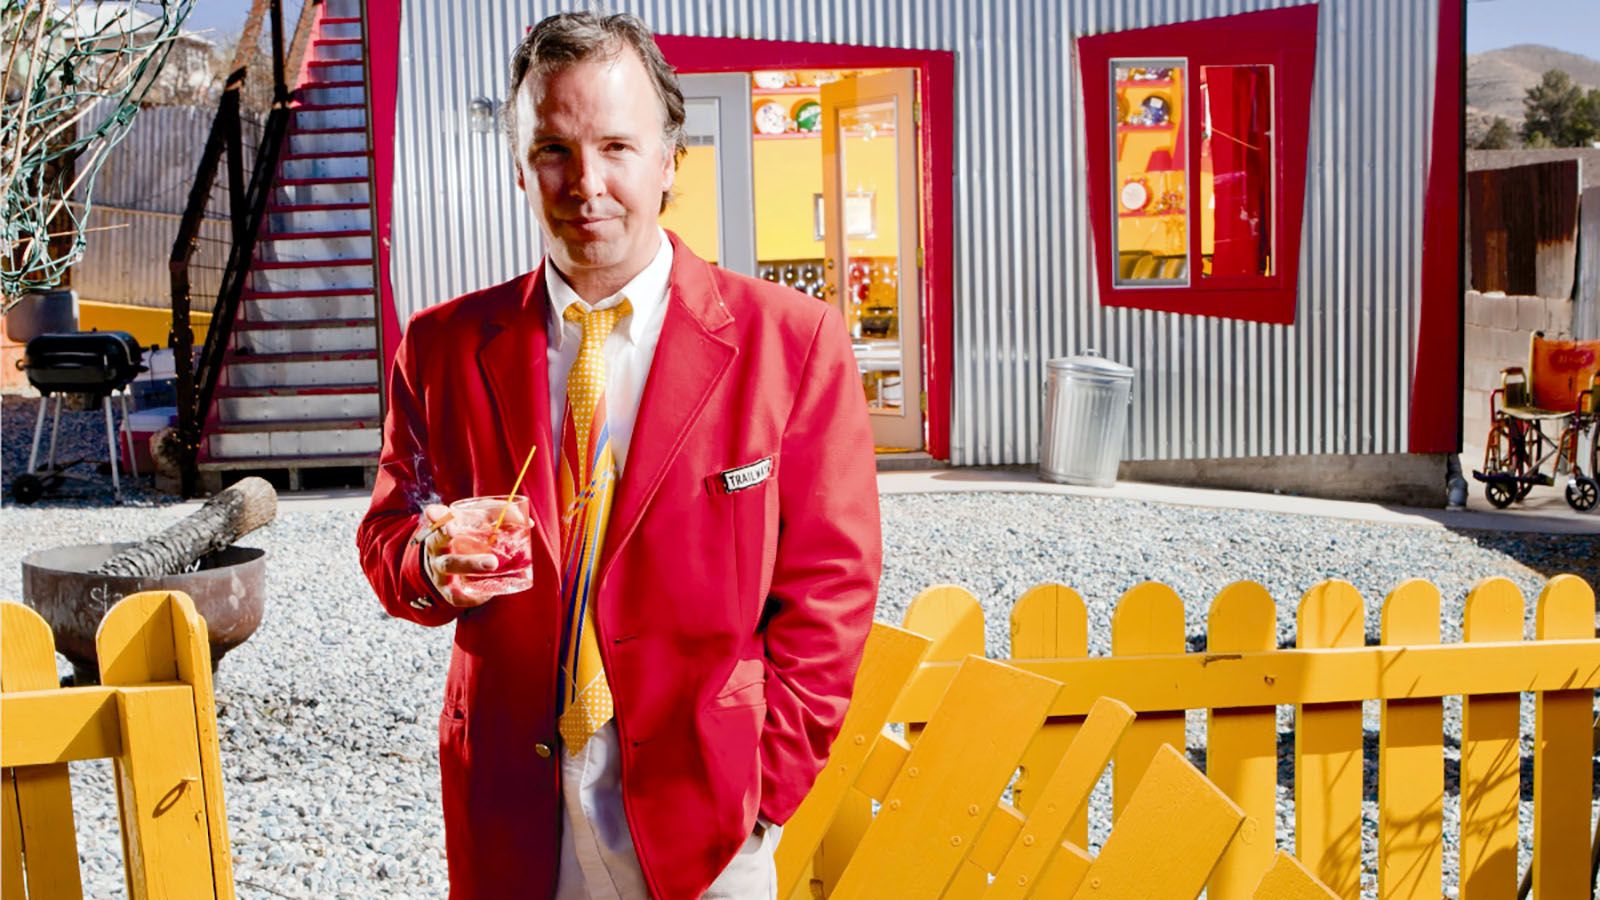 Doug Stanhope will be at Summit City Comedy Club on Aug. 23.